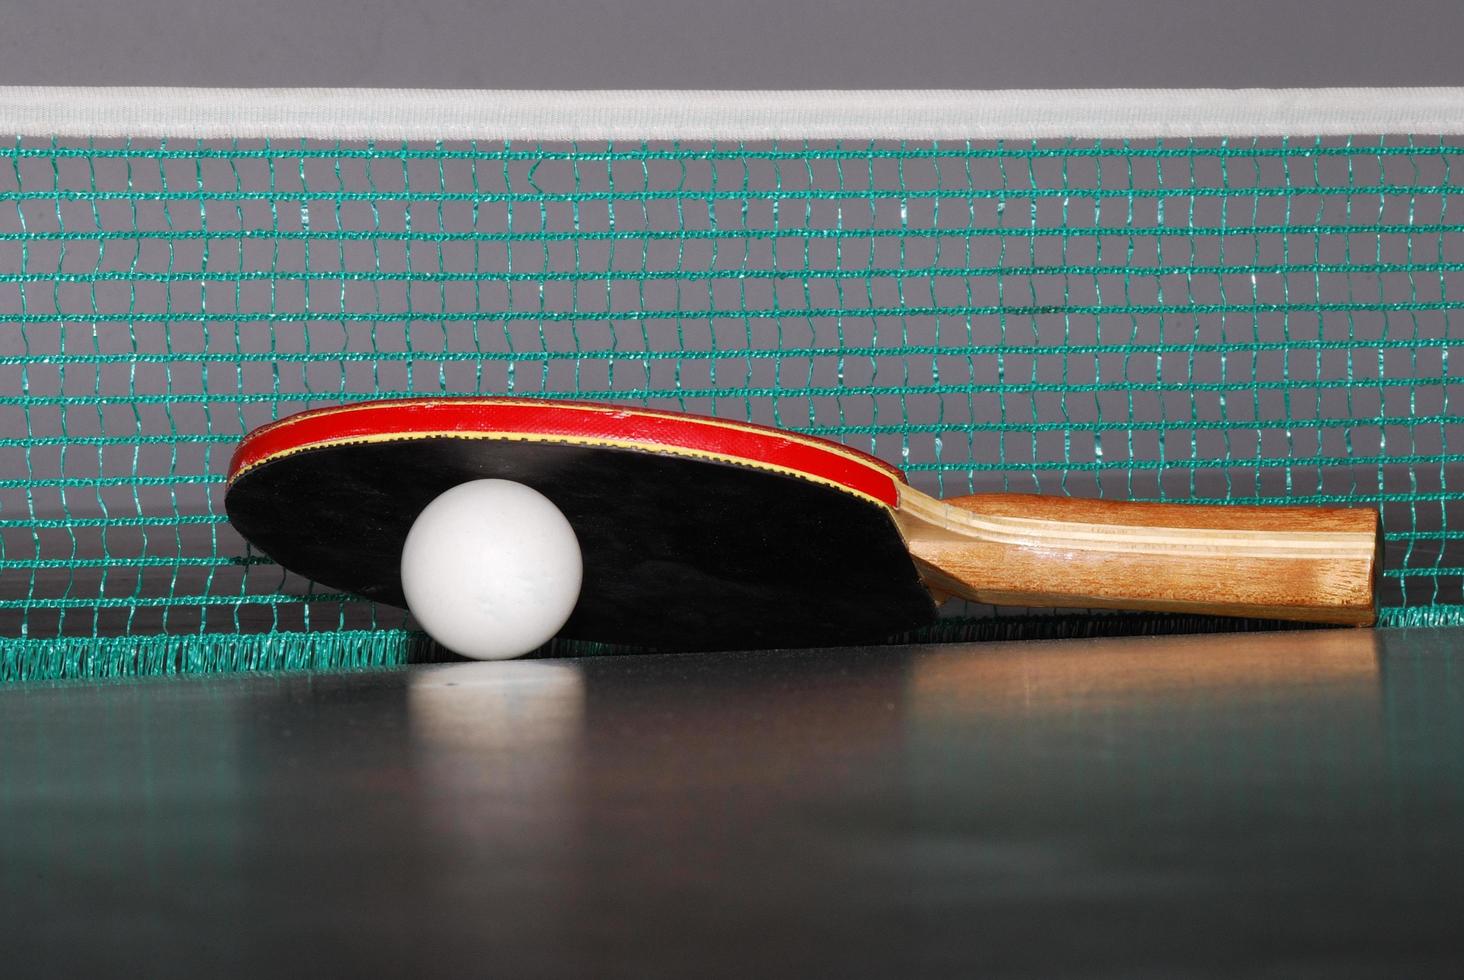 table tennis racket with ball and net close-up photo